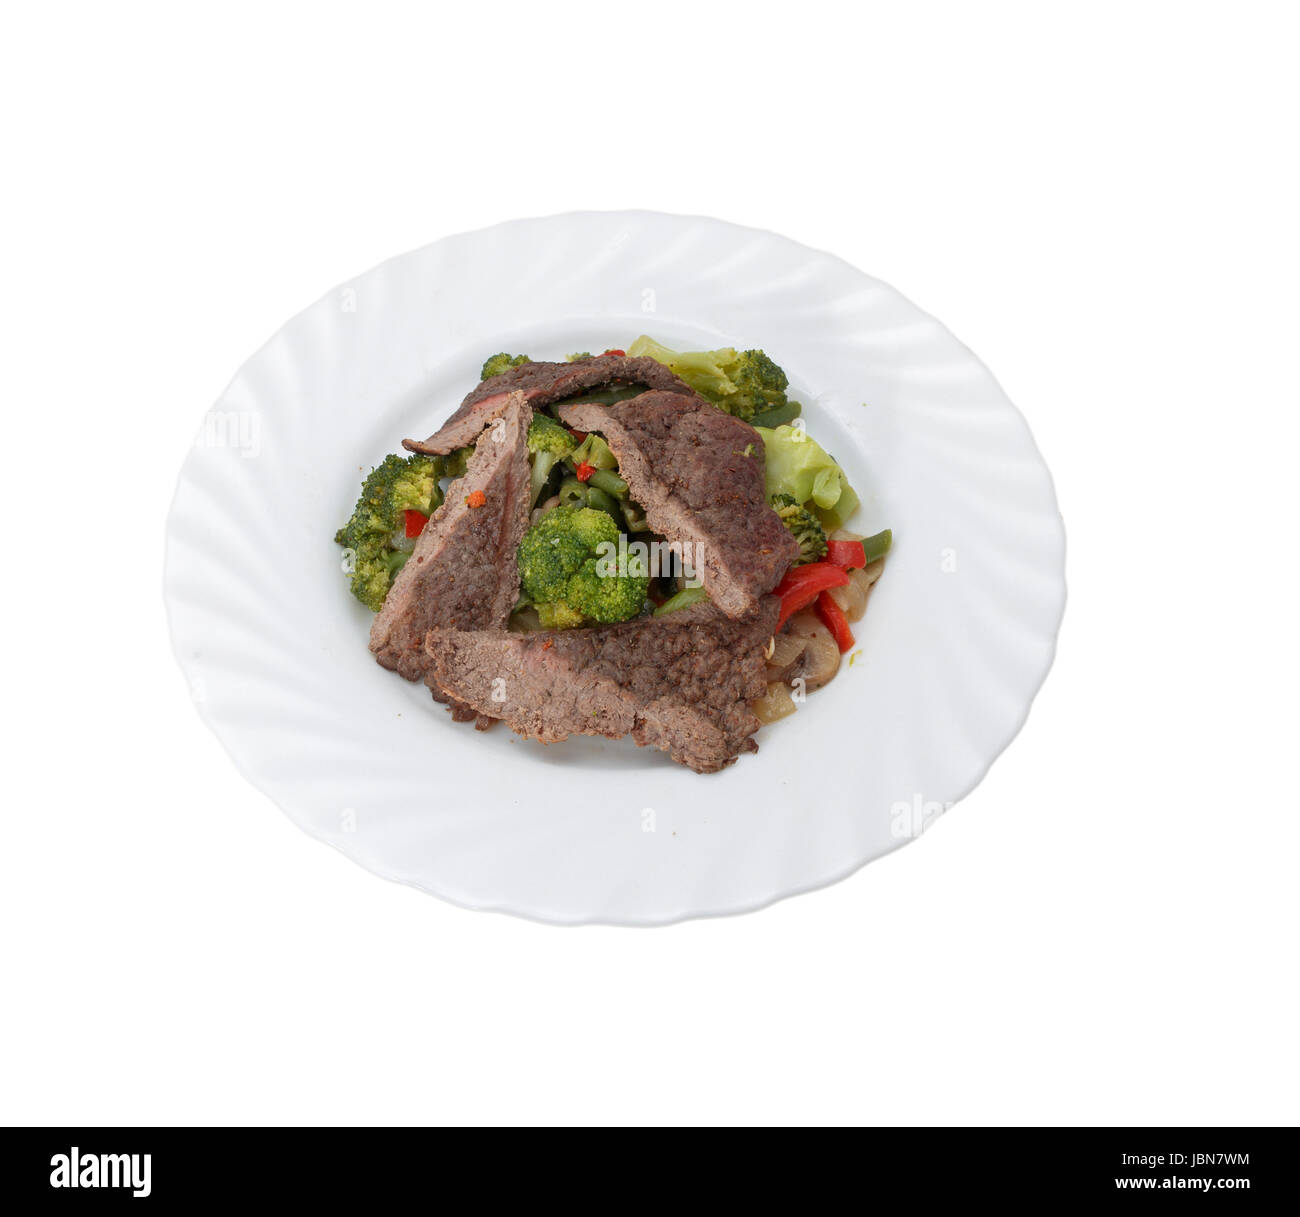 Beef Meat, Vegitables and green plants. Stock Photo